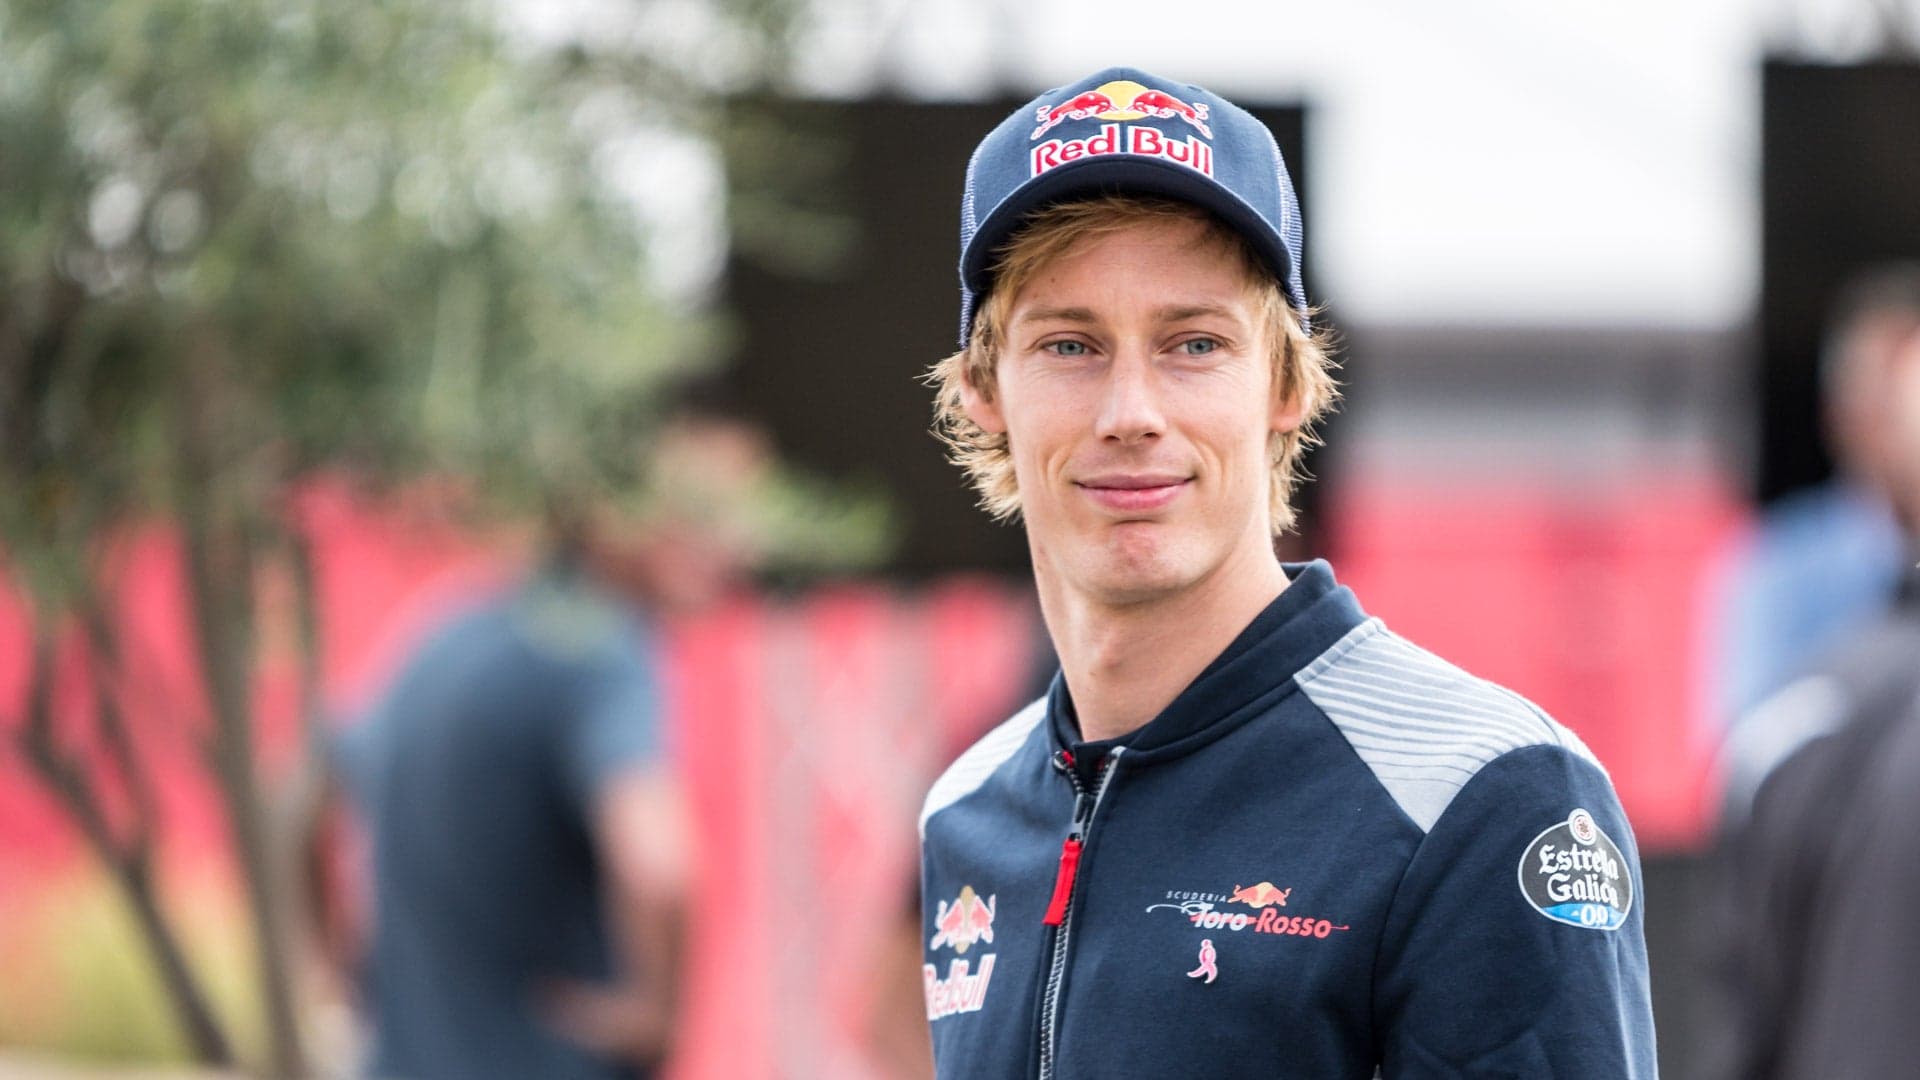 Brendon Hartley Preparing For First F1 Race at Austin